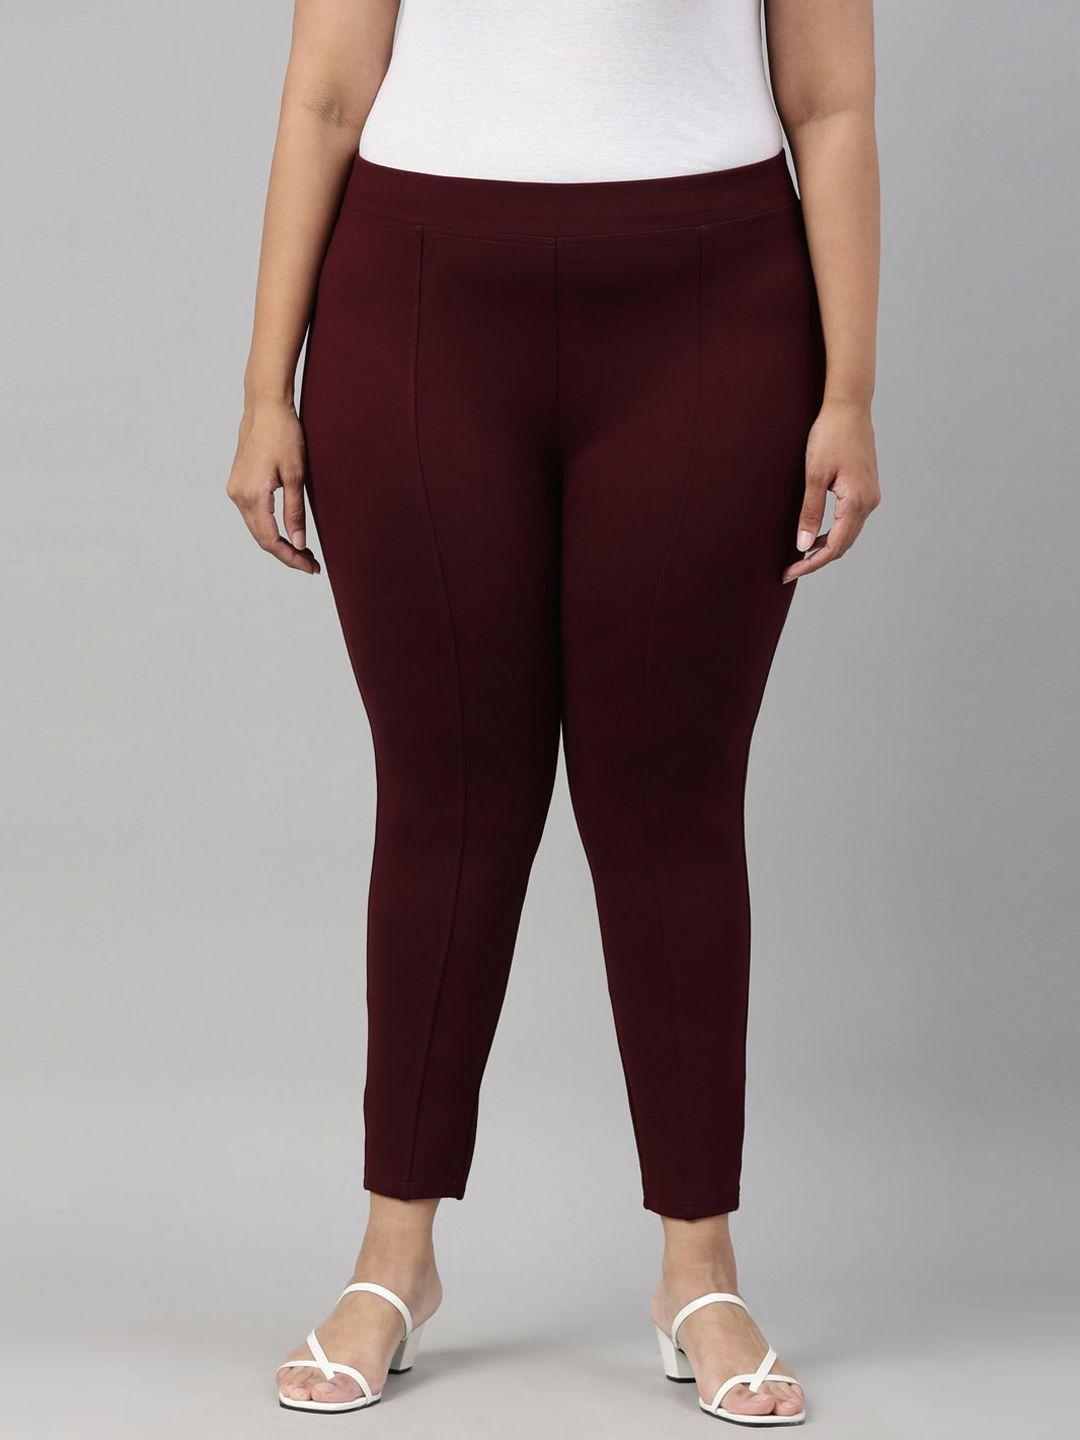 the-pink-moon-plus-size-women-burgundy-tapered-fit-high-rise-wrinkle-free-trousers